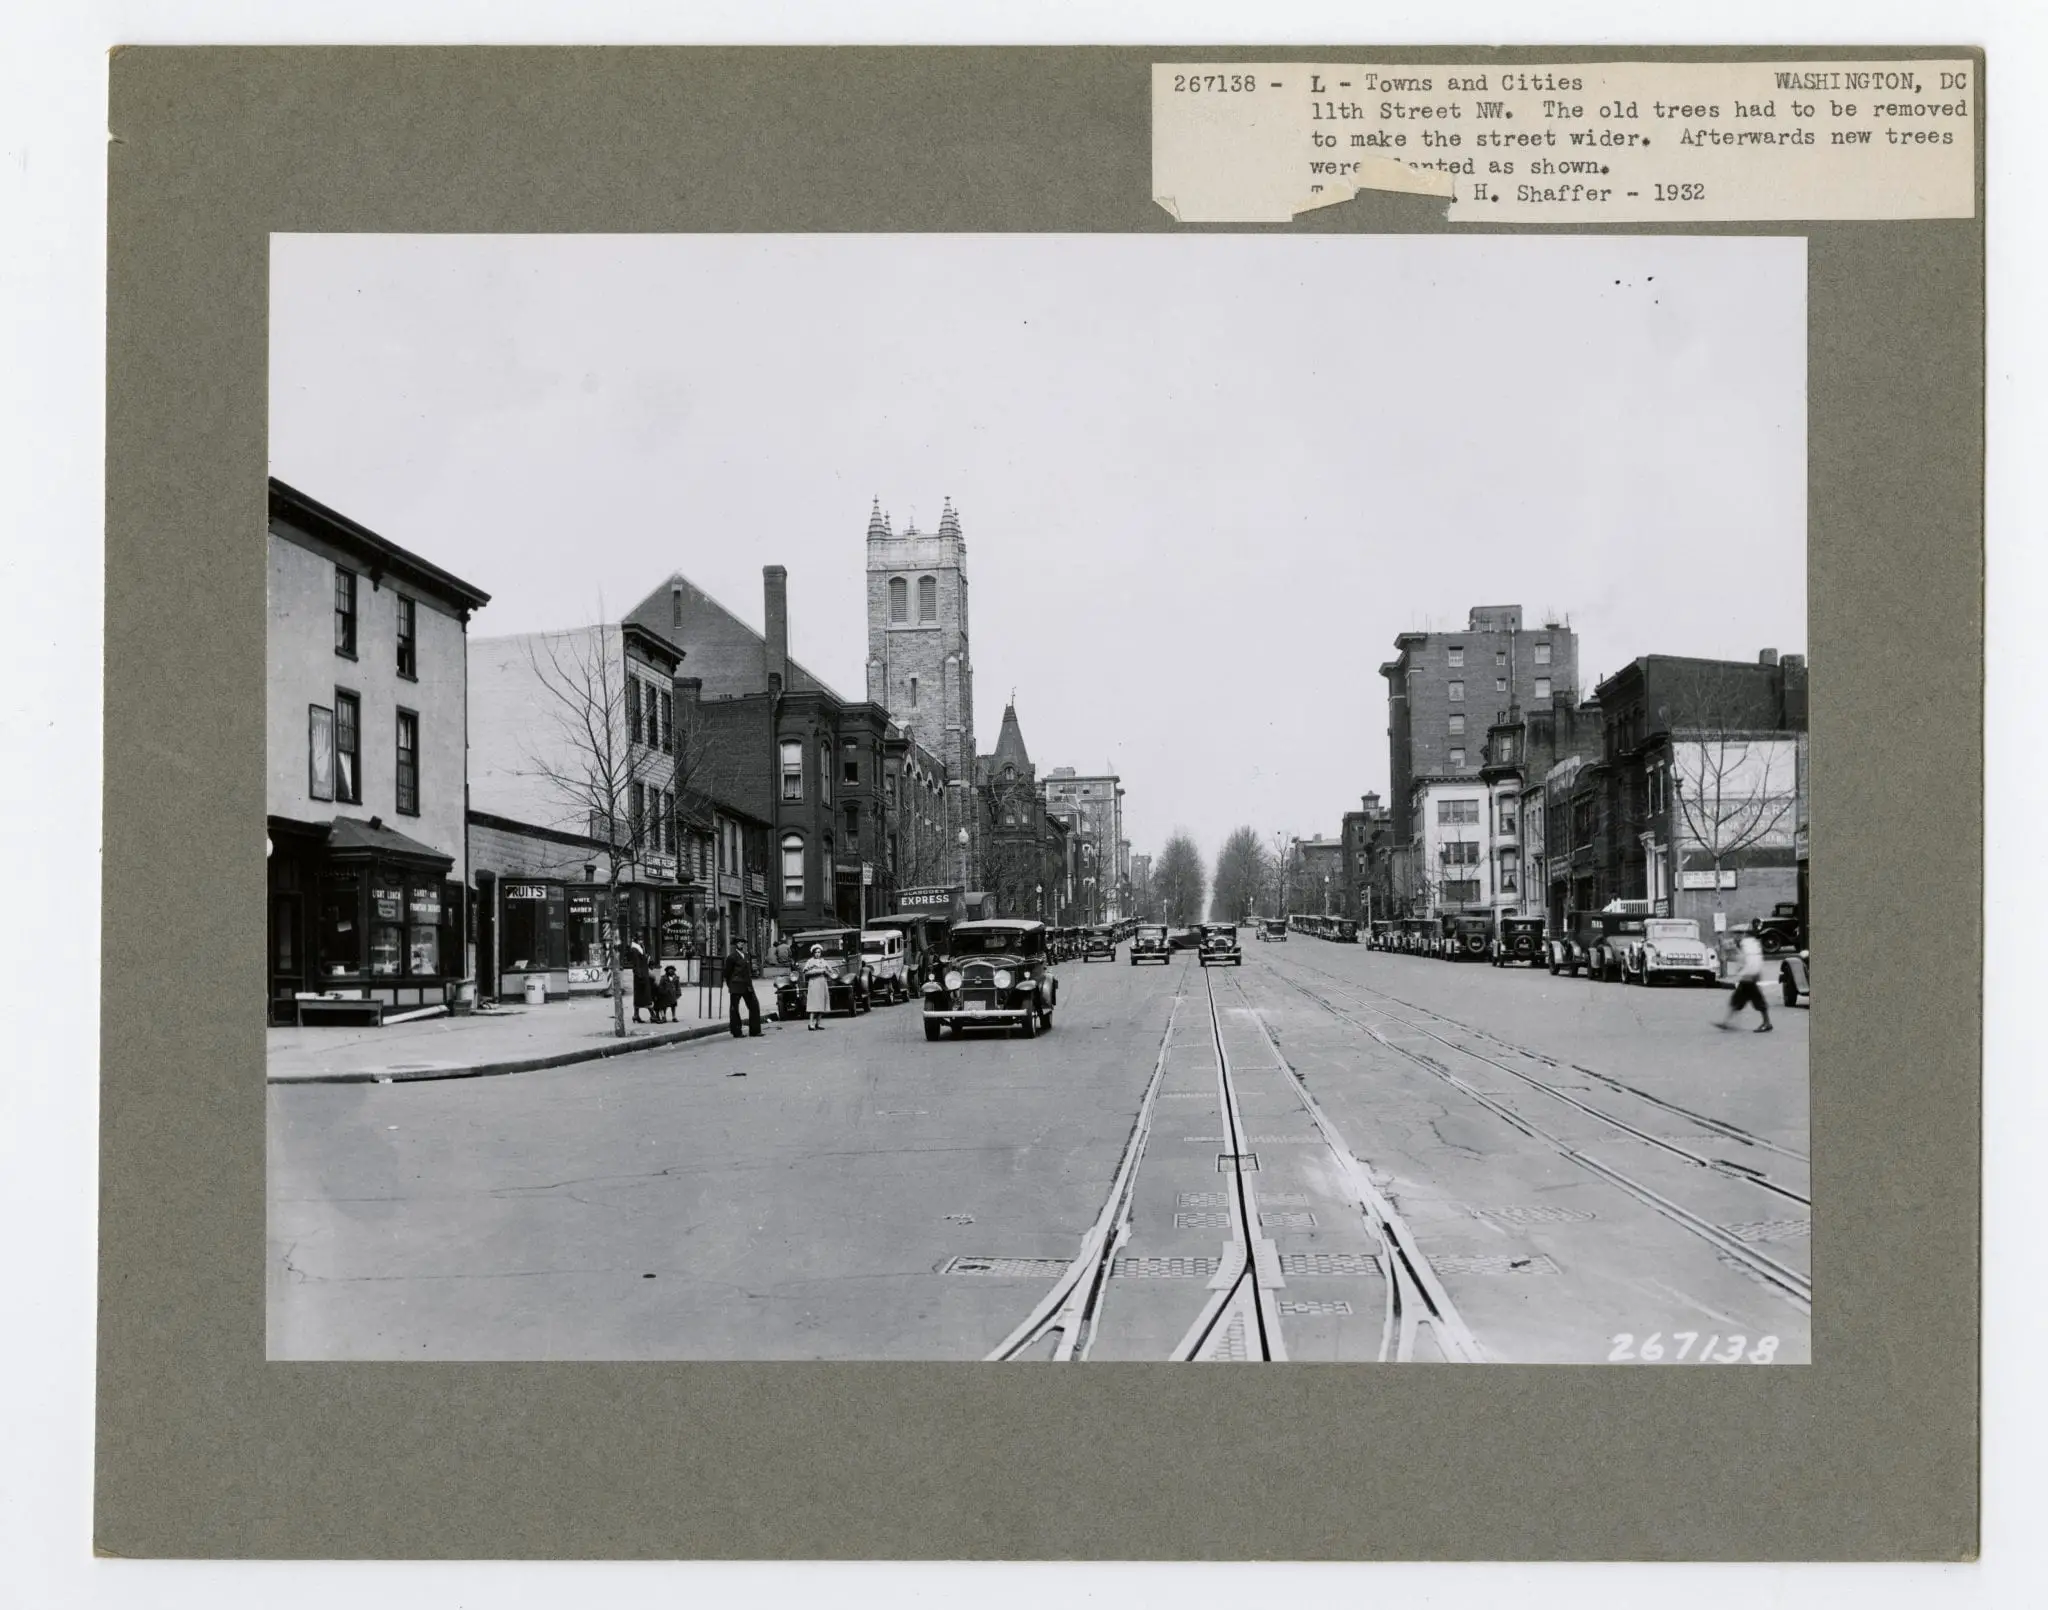 11th and L St. NW in the 1920s